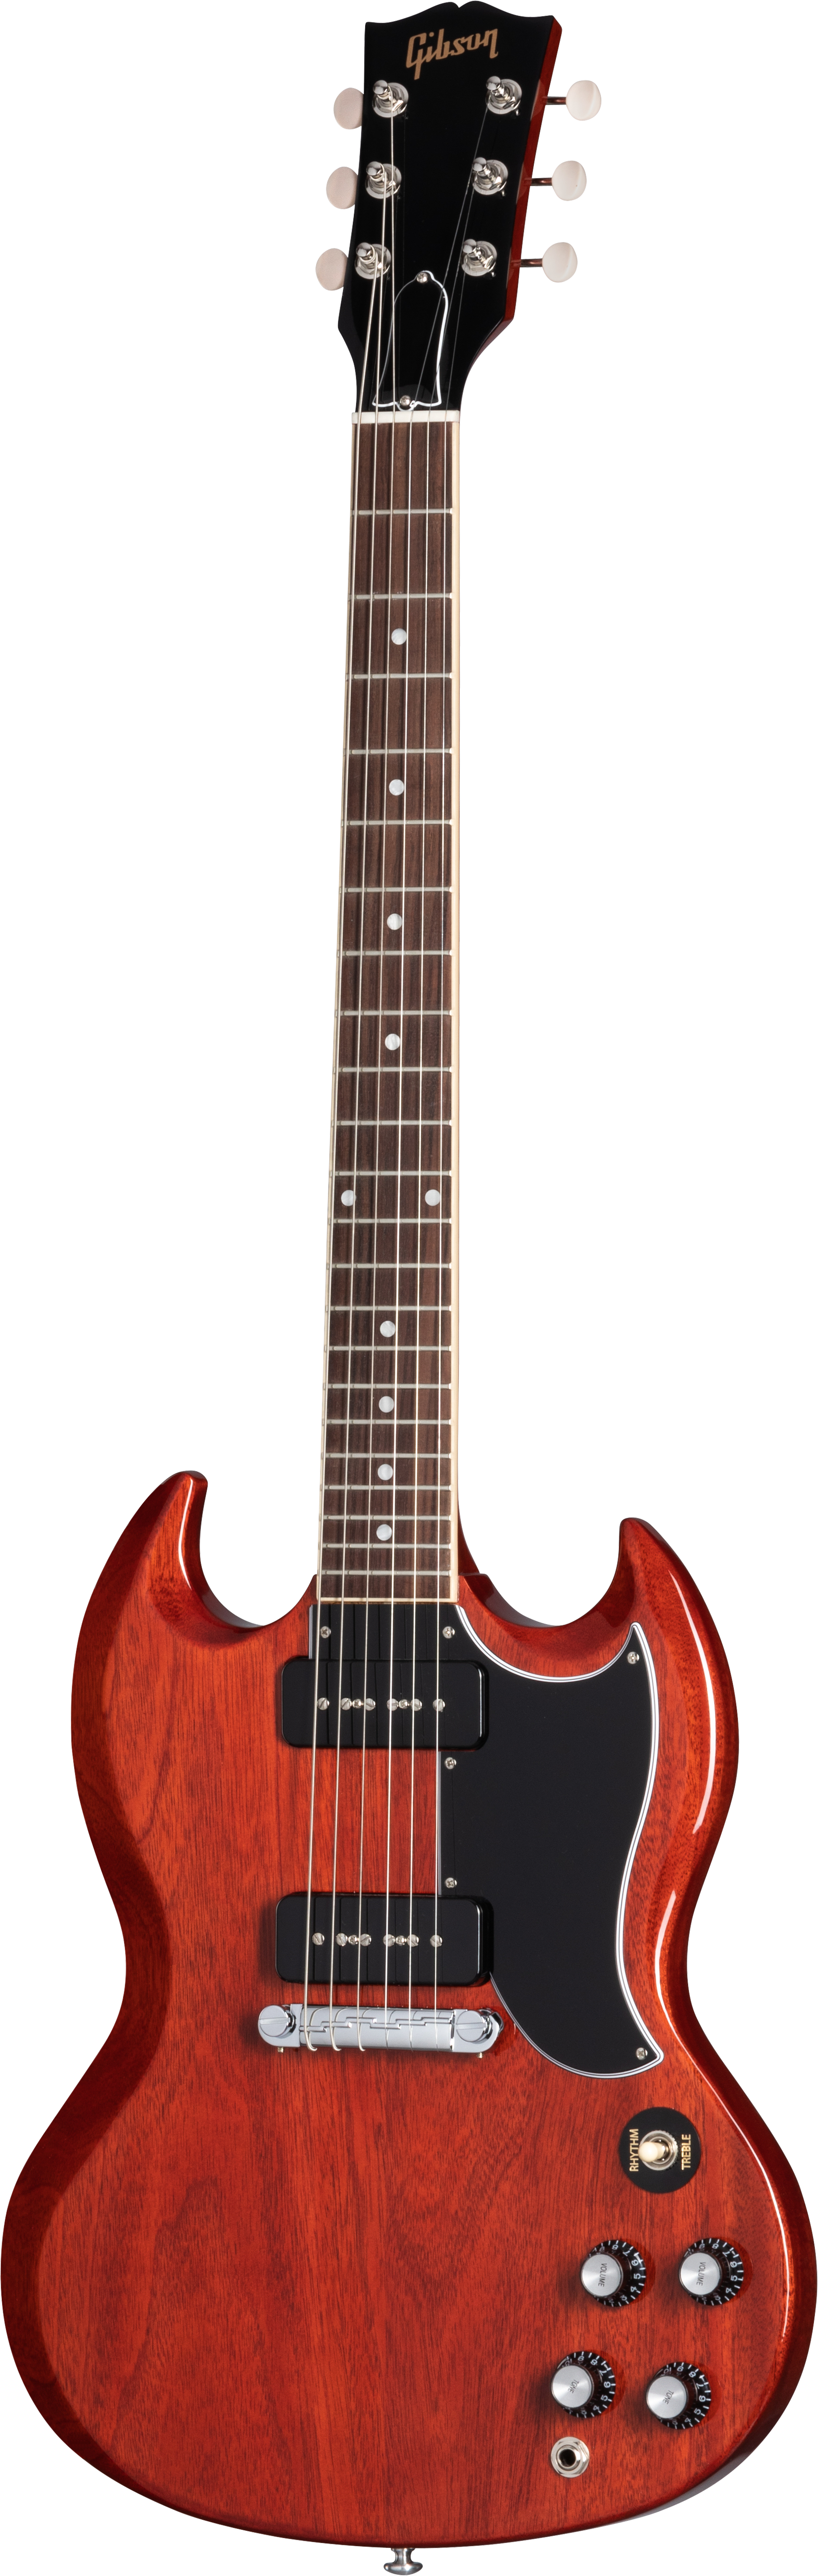 Full frontal of Gibson SG Special Vintage Cherry.